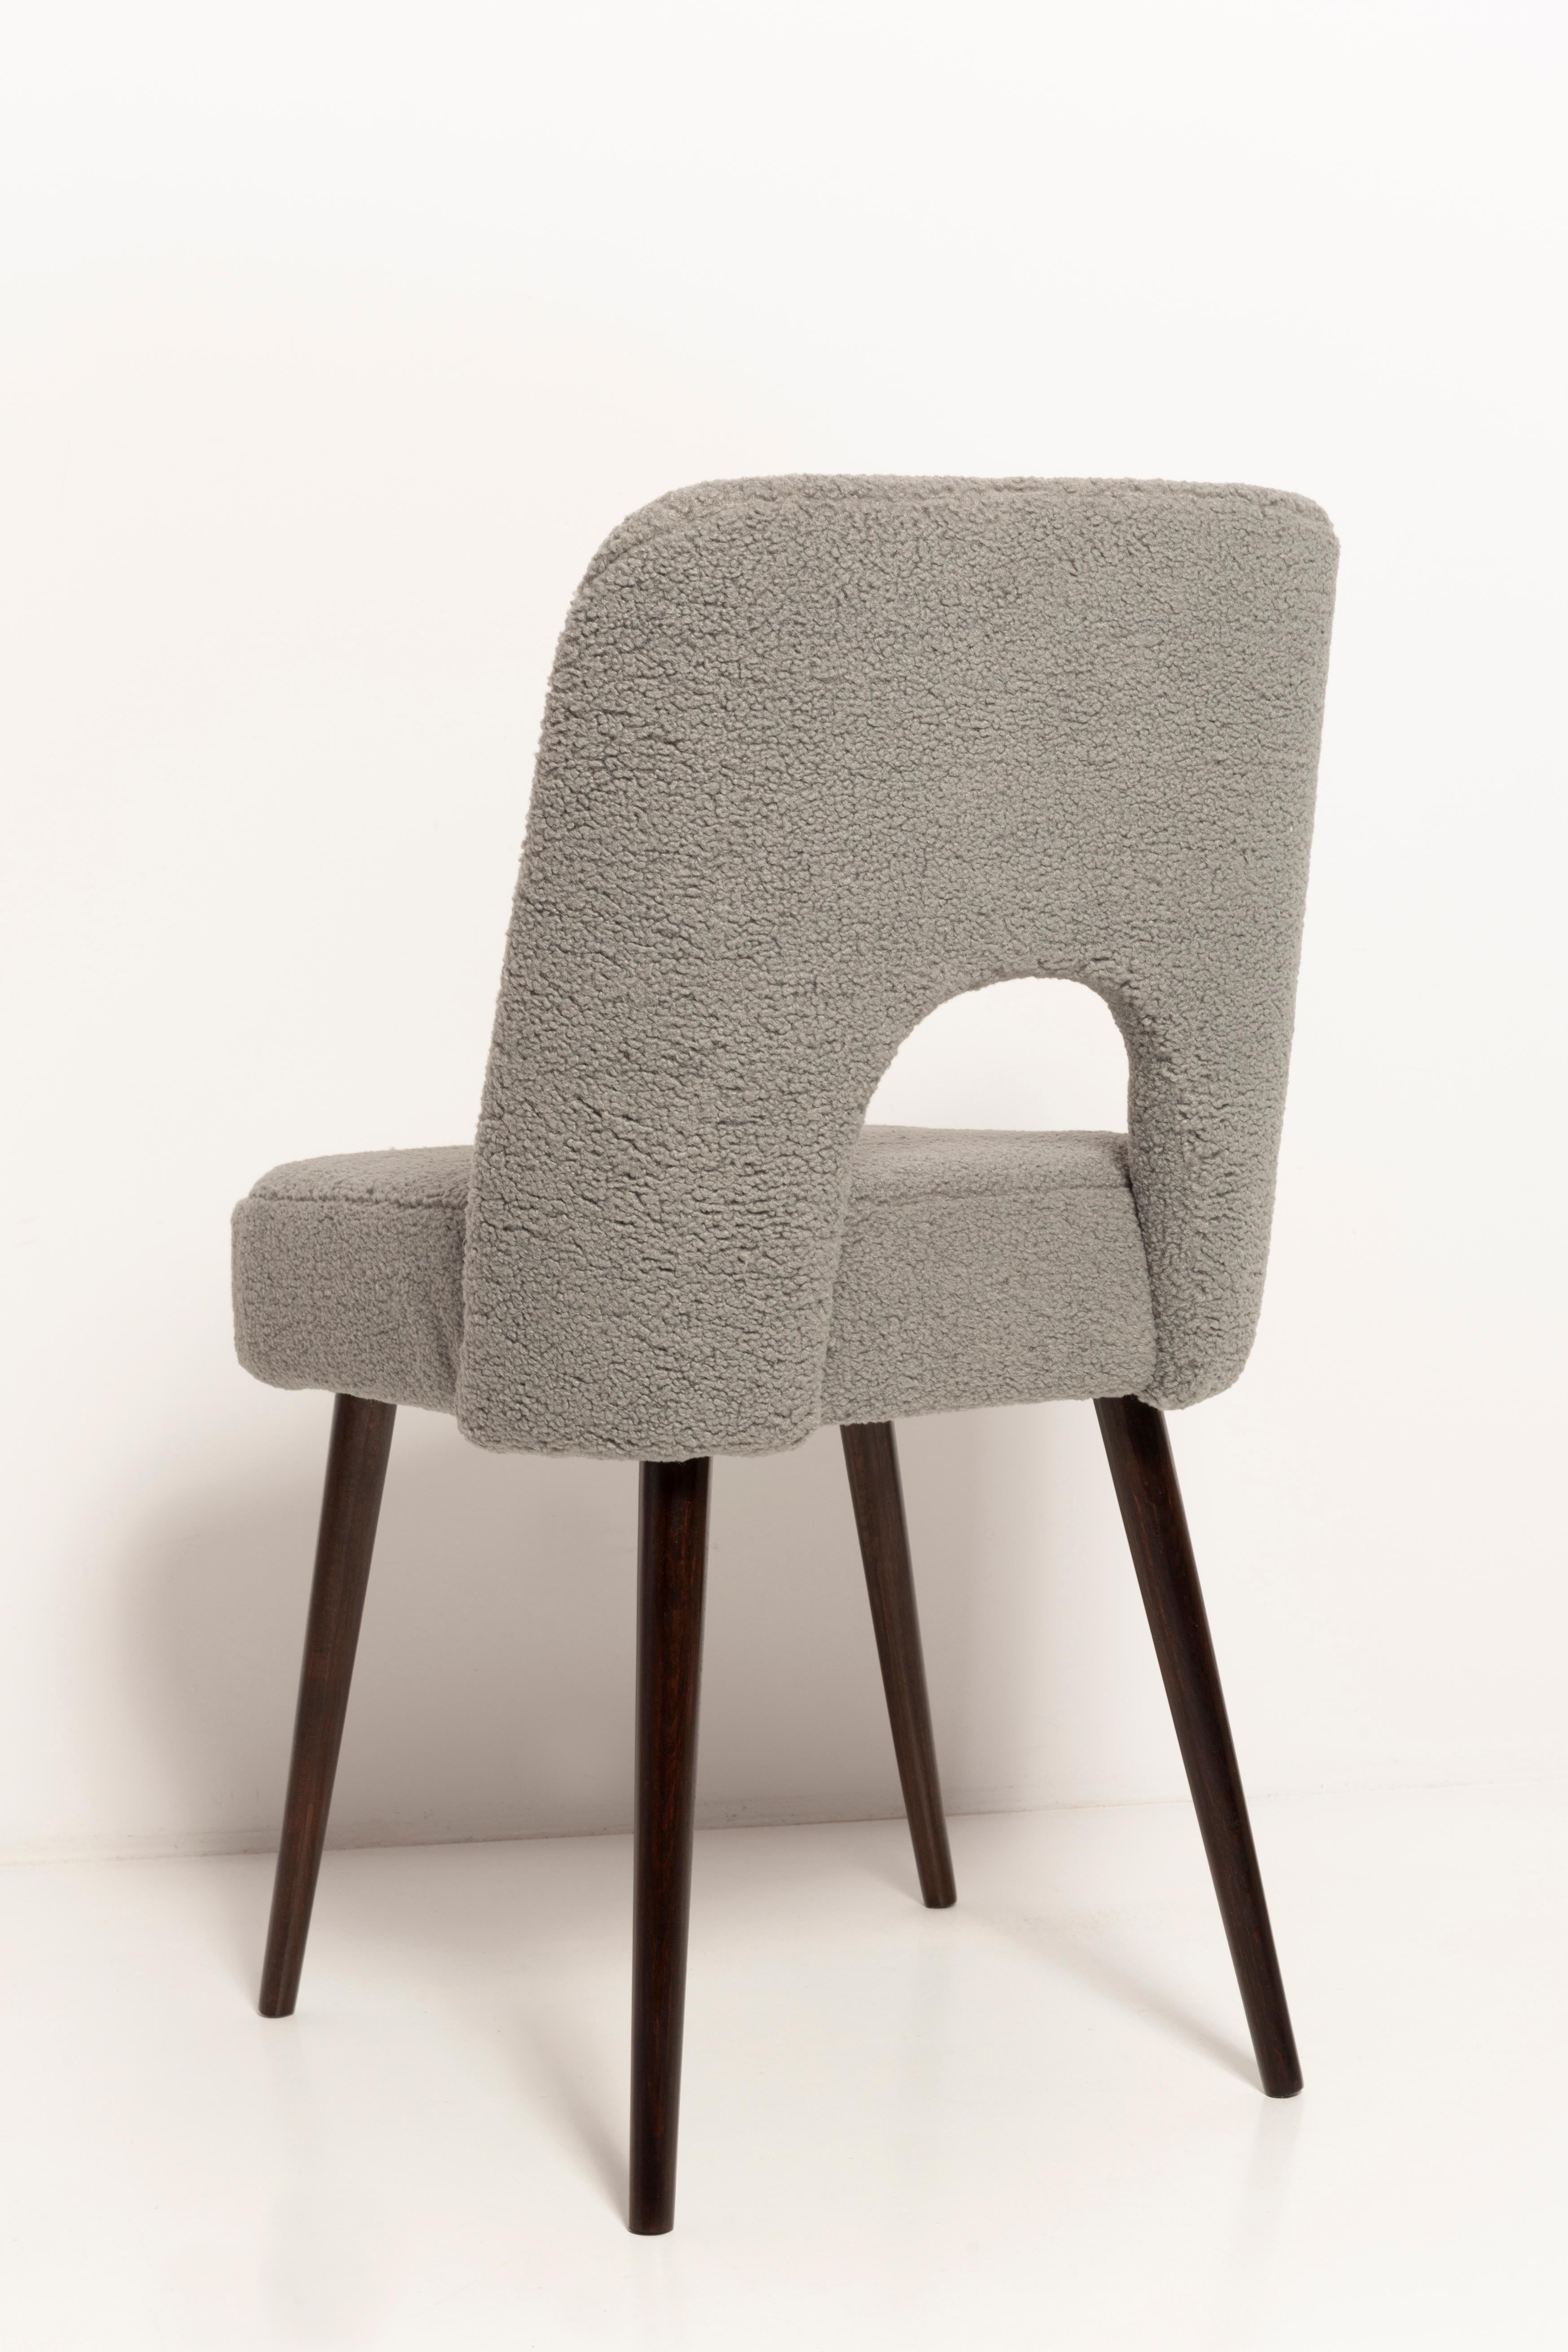 Gray Boucle 'Shell' Chair, Europe, 1960s For Sale 5